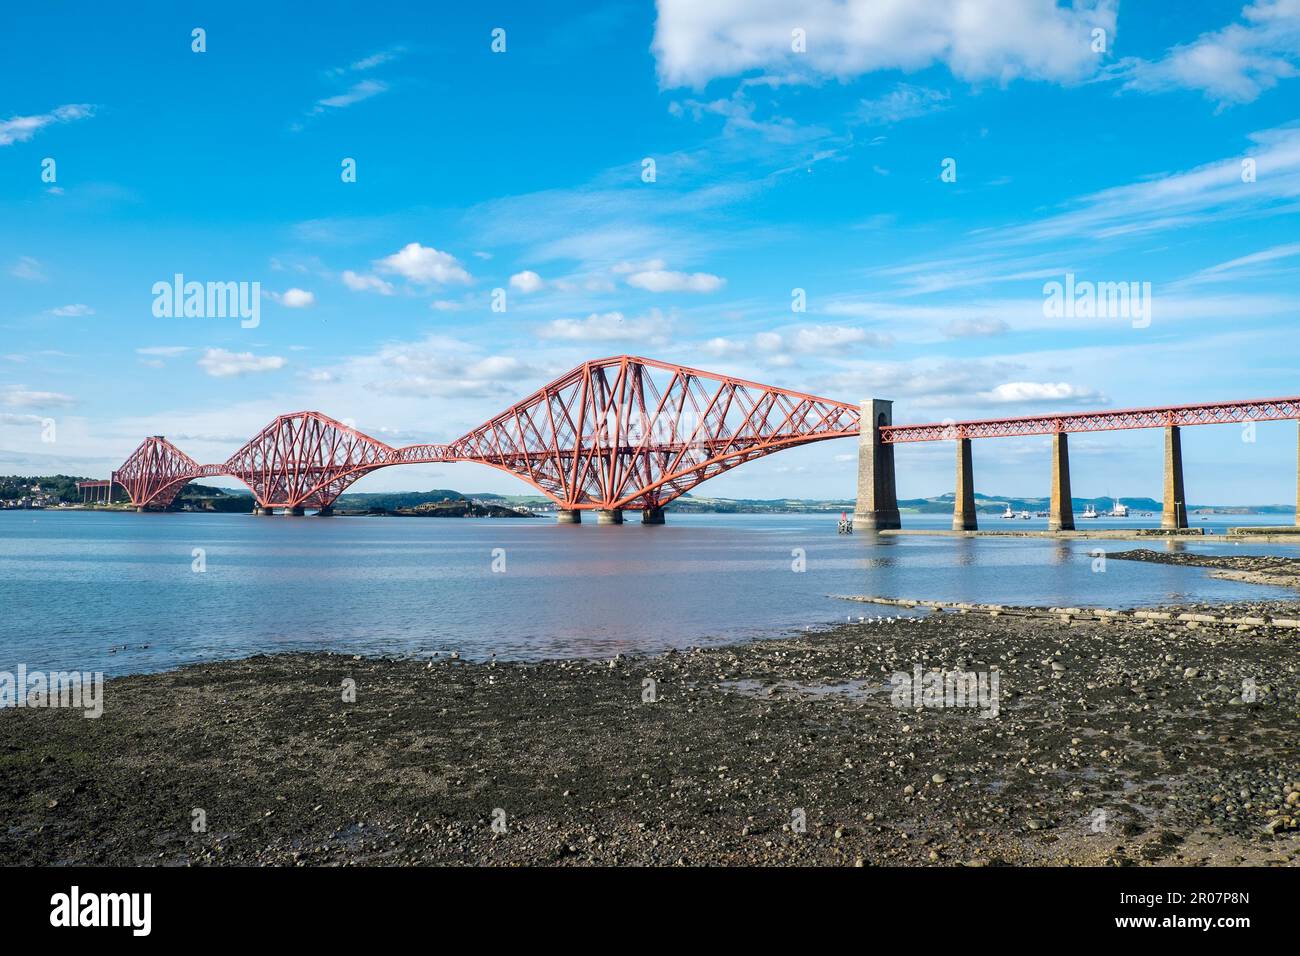 The famous Forth Railway Bridge over the Firth of Forth in Scotland, Great Britain Stock Photo